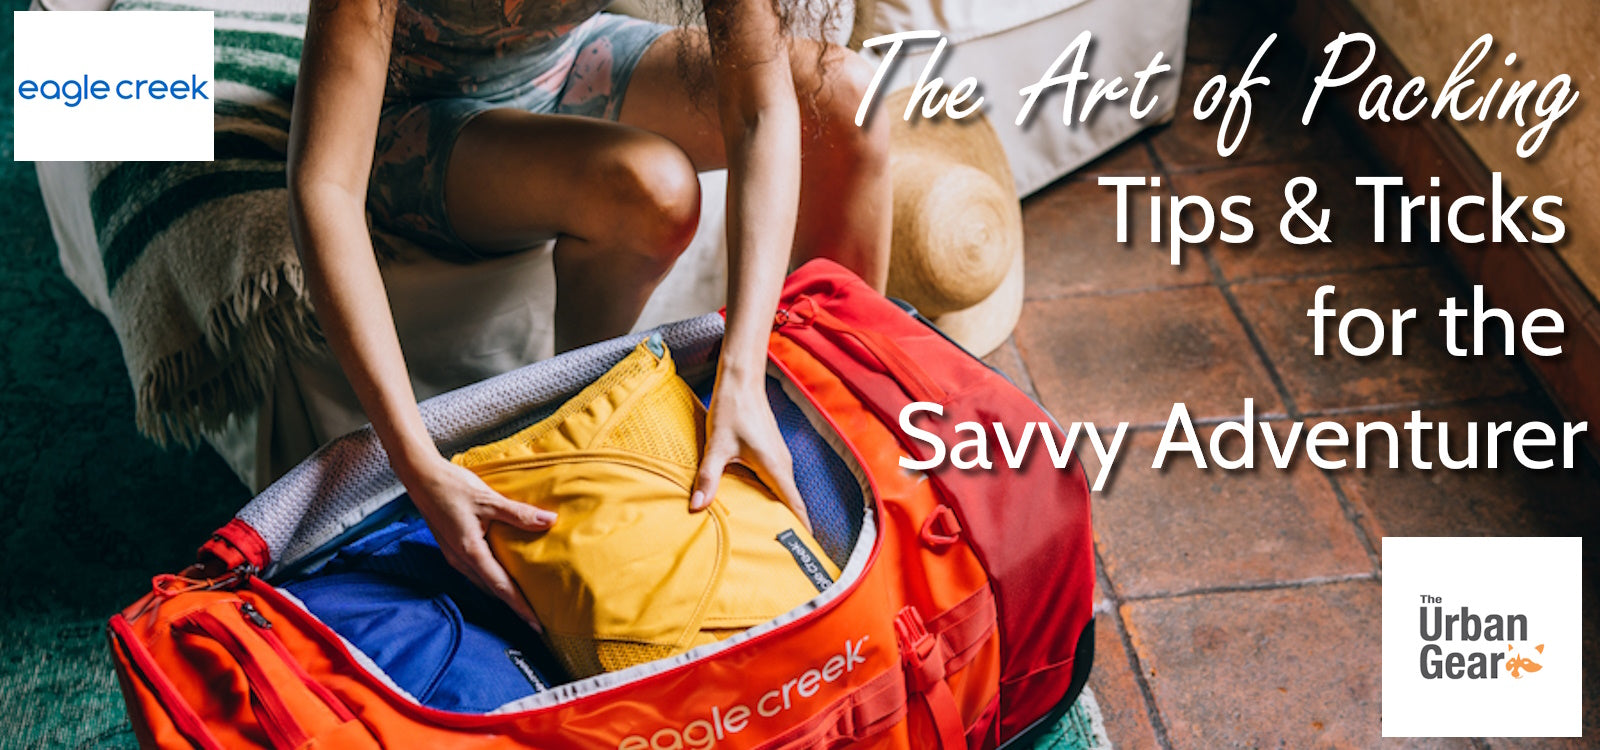 The Art of Packing: Tips and Tricks for the Savvy Adventurer